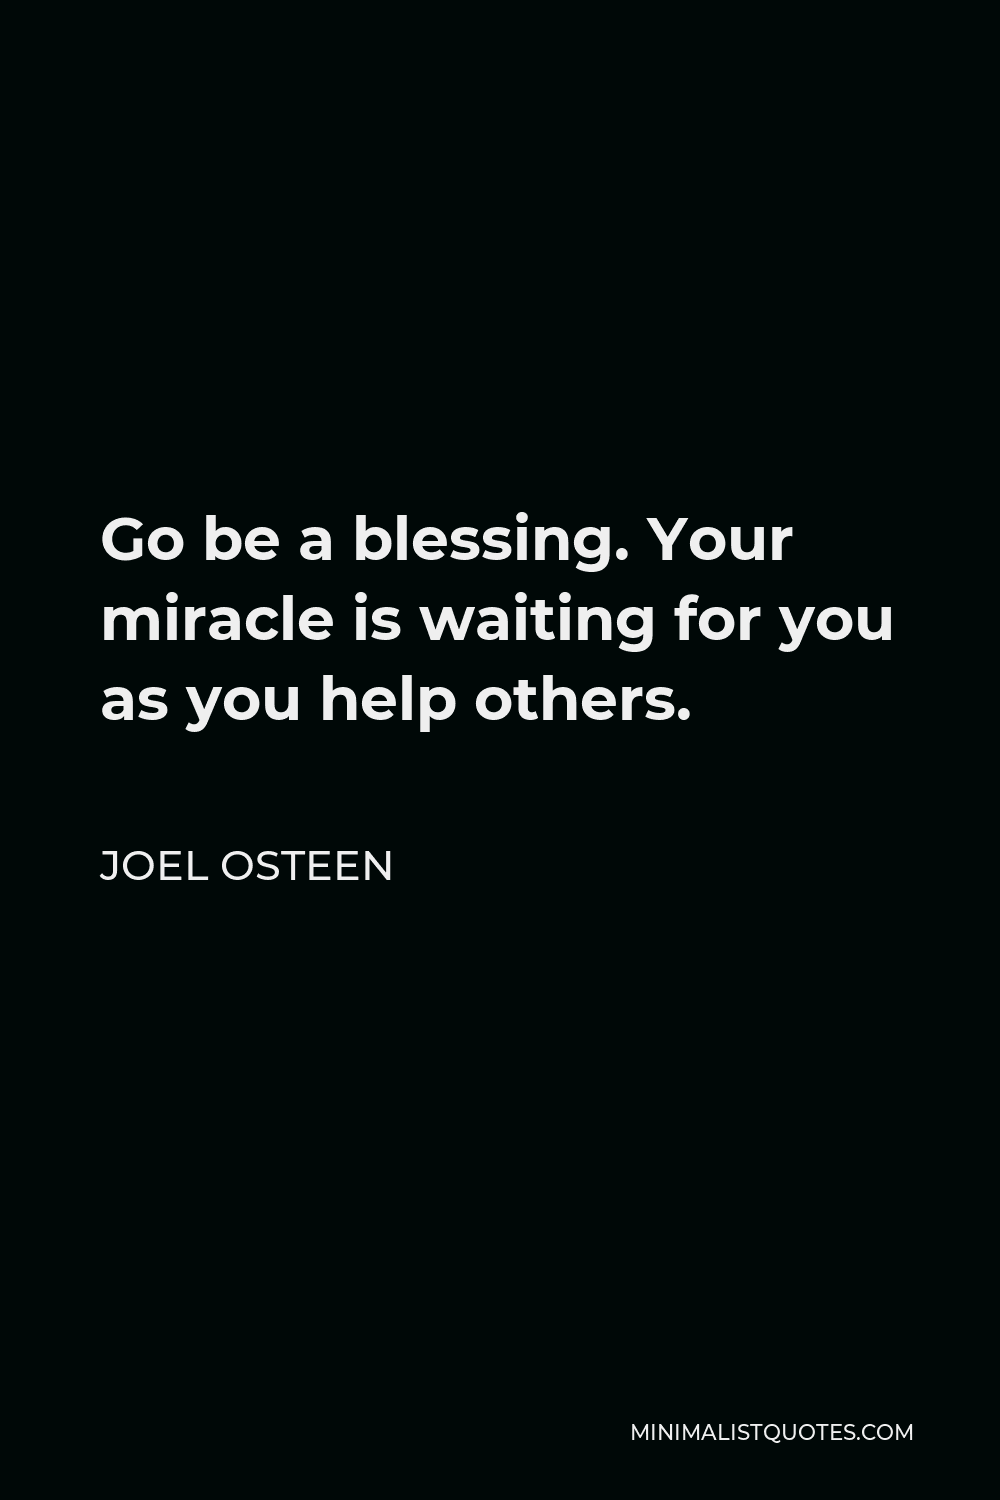 Joel Osteen Quote: Go be a blessing. Your miracle is waiting for you as ...